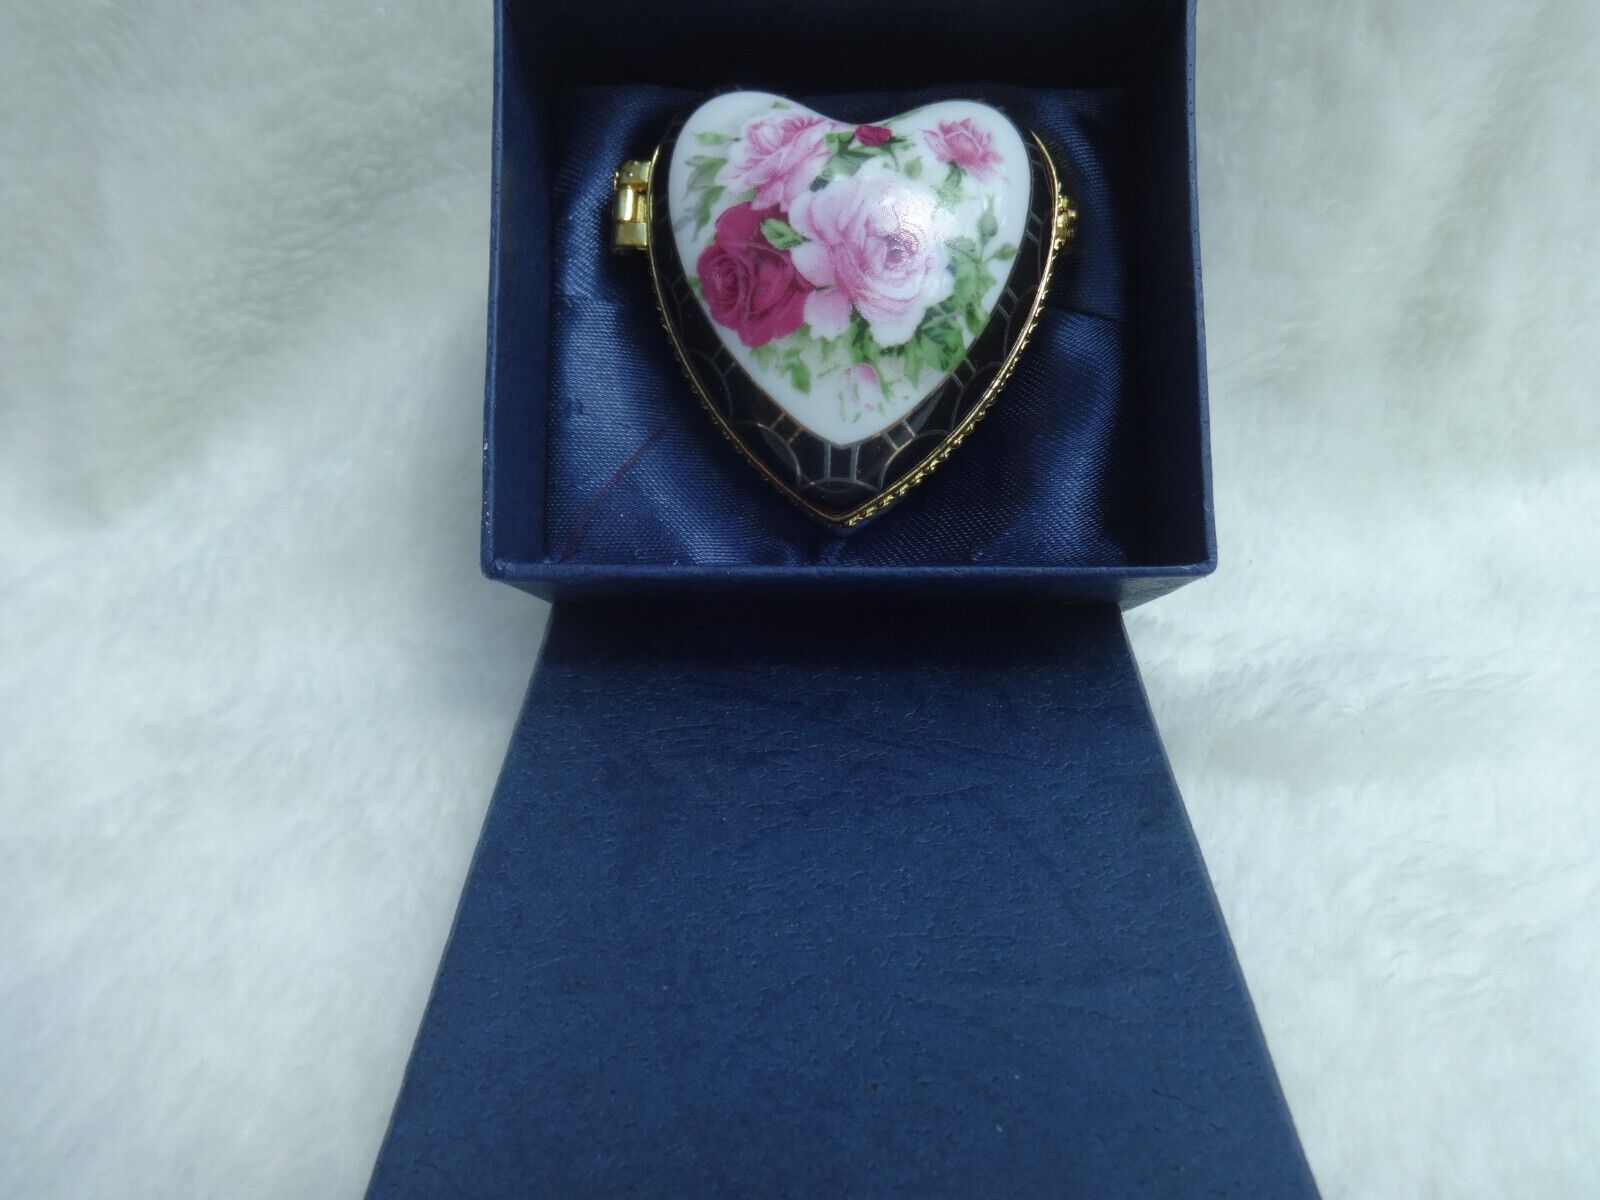 Heart Shaped Trinket Box Porcelain with Hinged Lid Flower Design NEW IN BOX